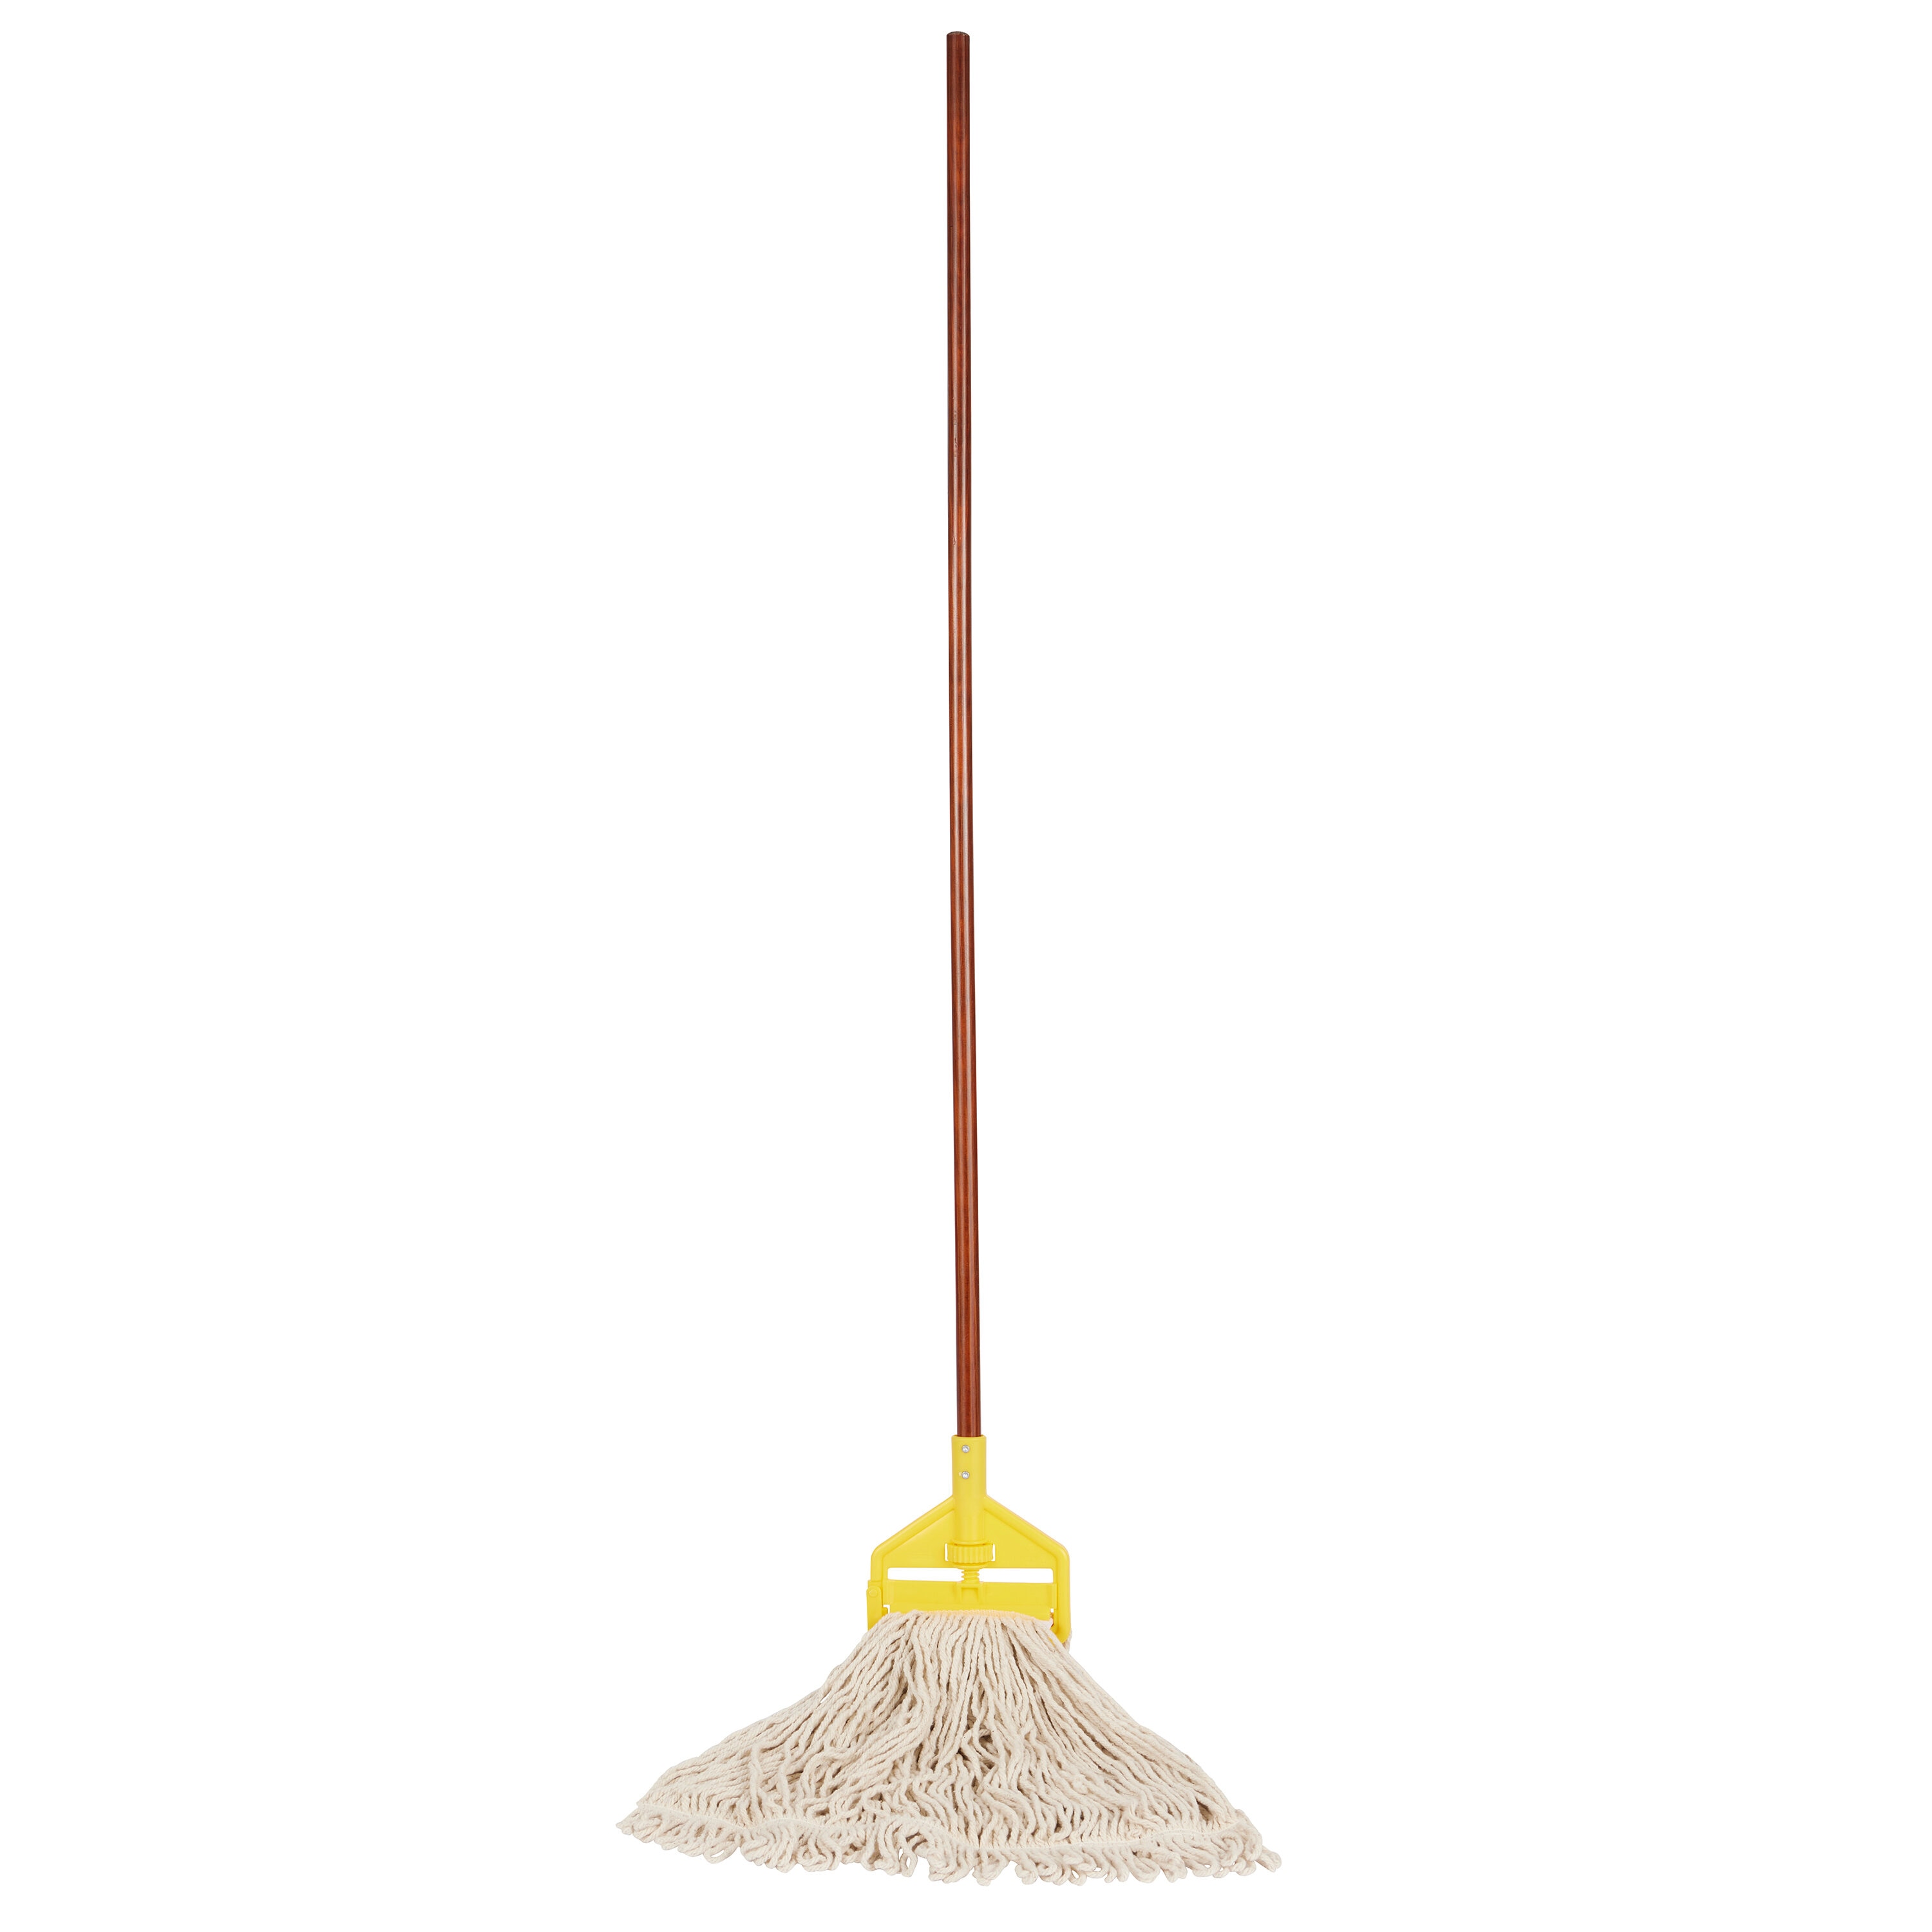 Commercial Wet Mops: How to Use a Mop & The Best Way to Clean a